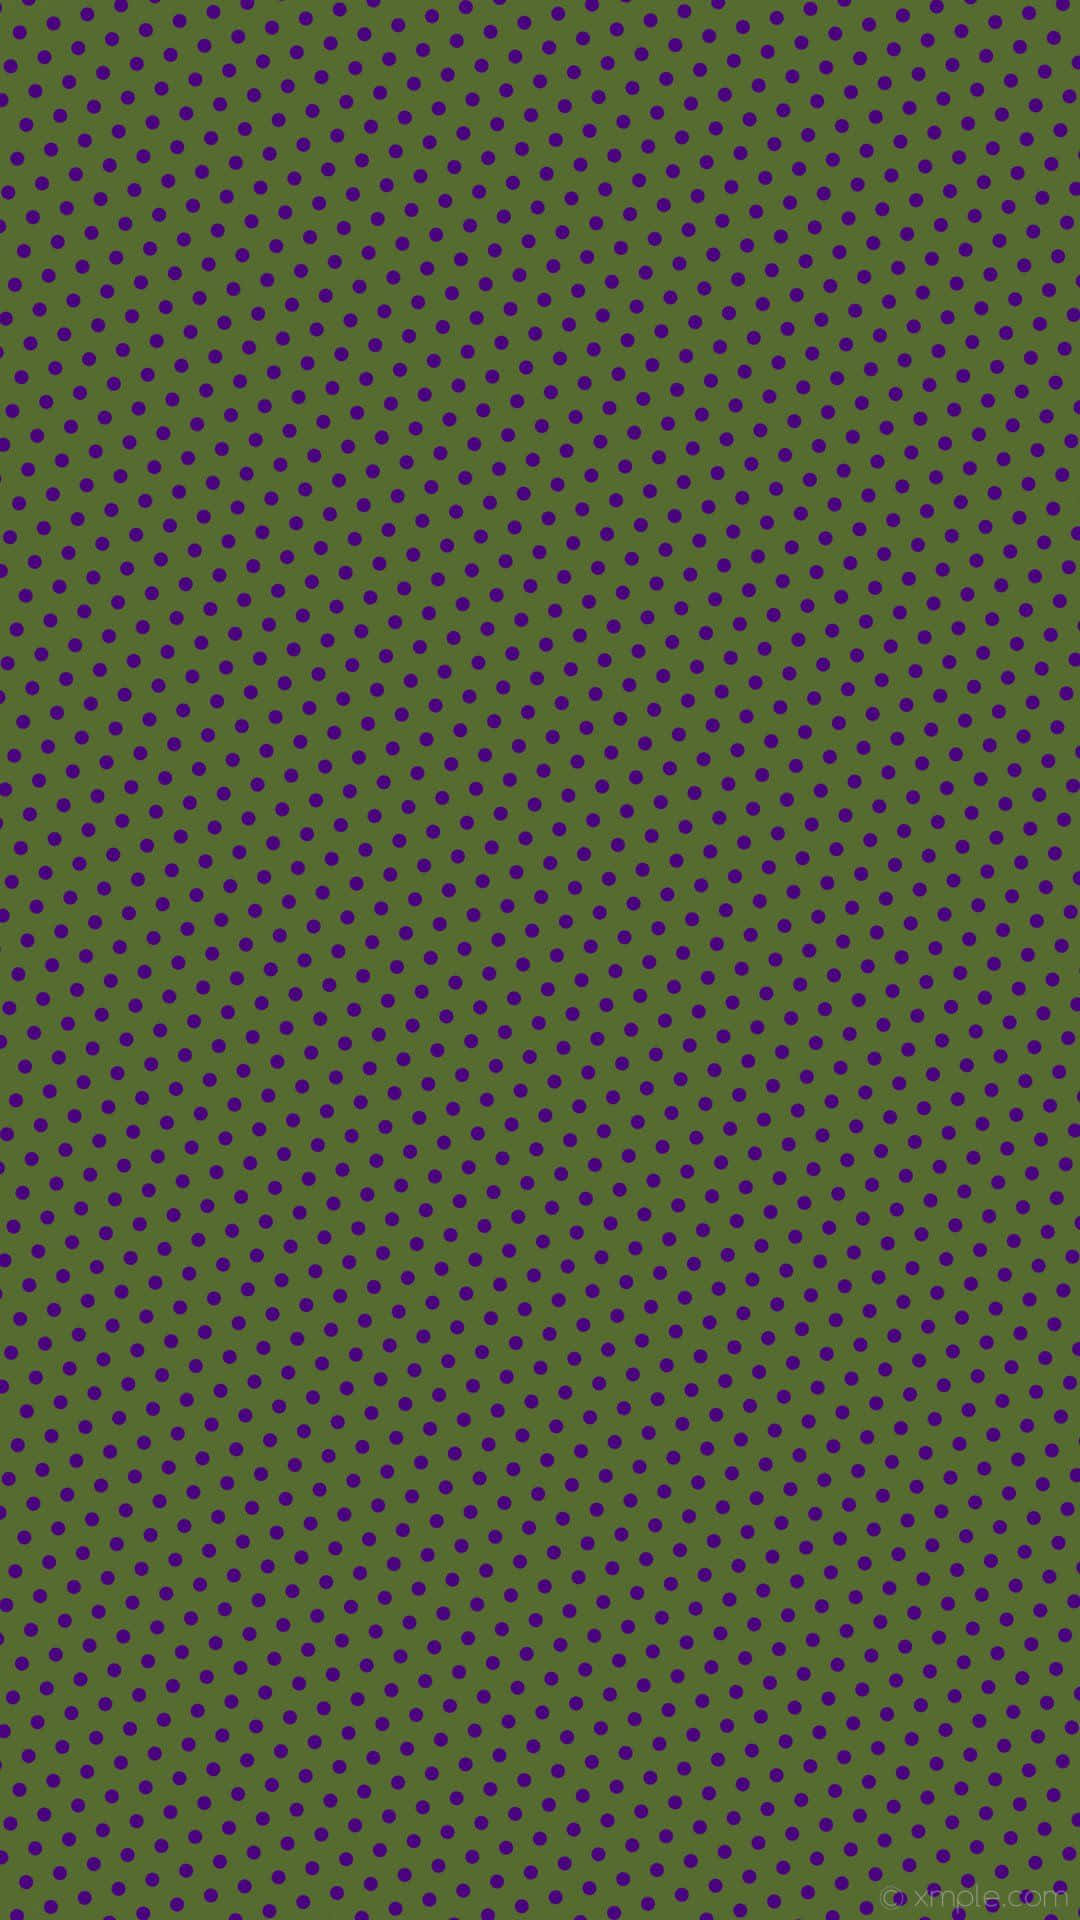 Acrylic painting dark olive green phone wallpaper background  free image  by rawpixelcom  n  Iphone wallpaper green Sage green wallpaper Olive  green wallpaper